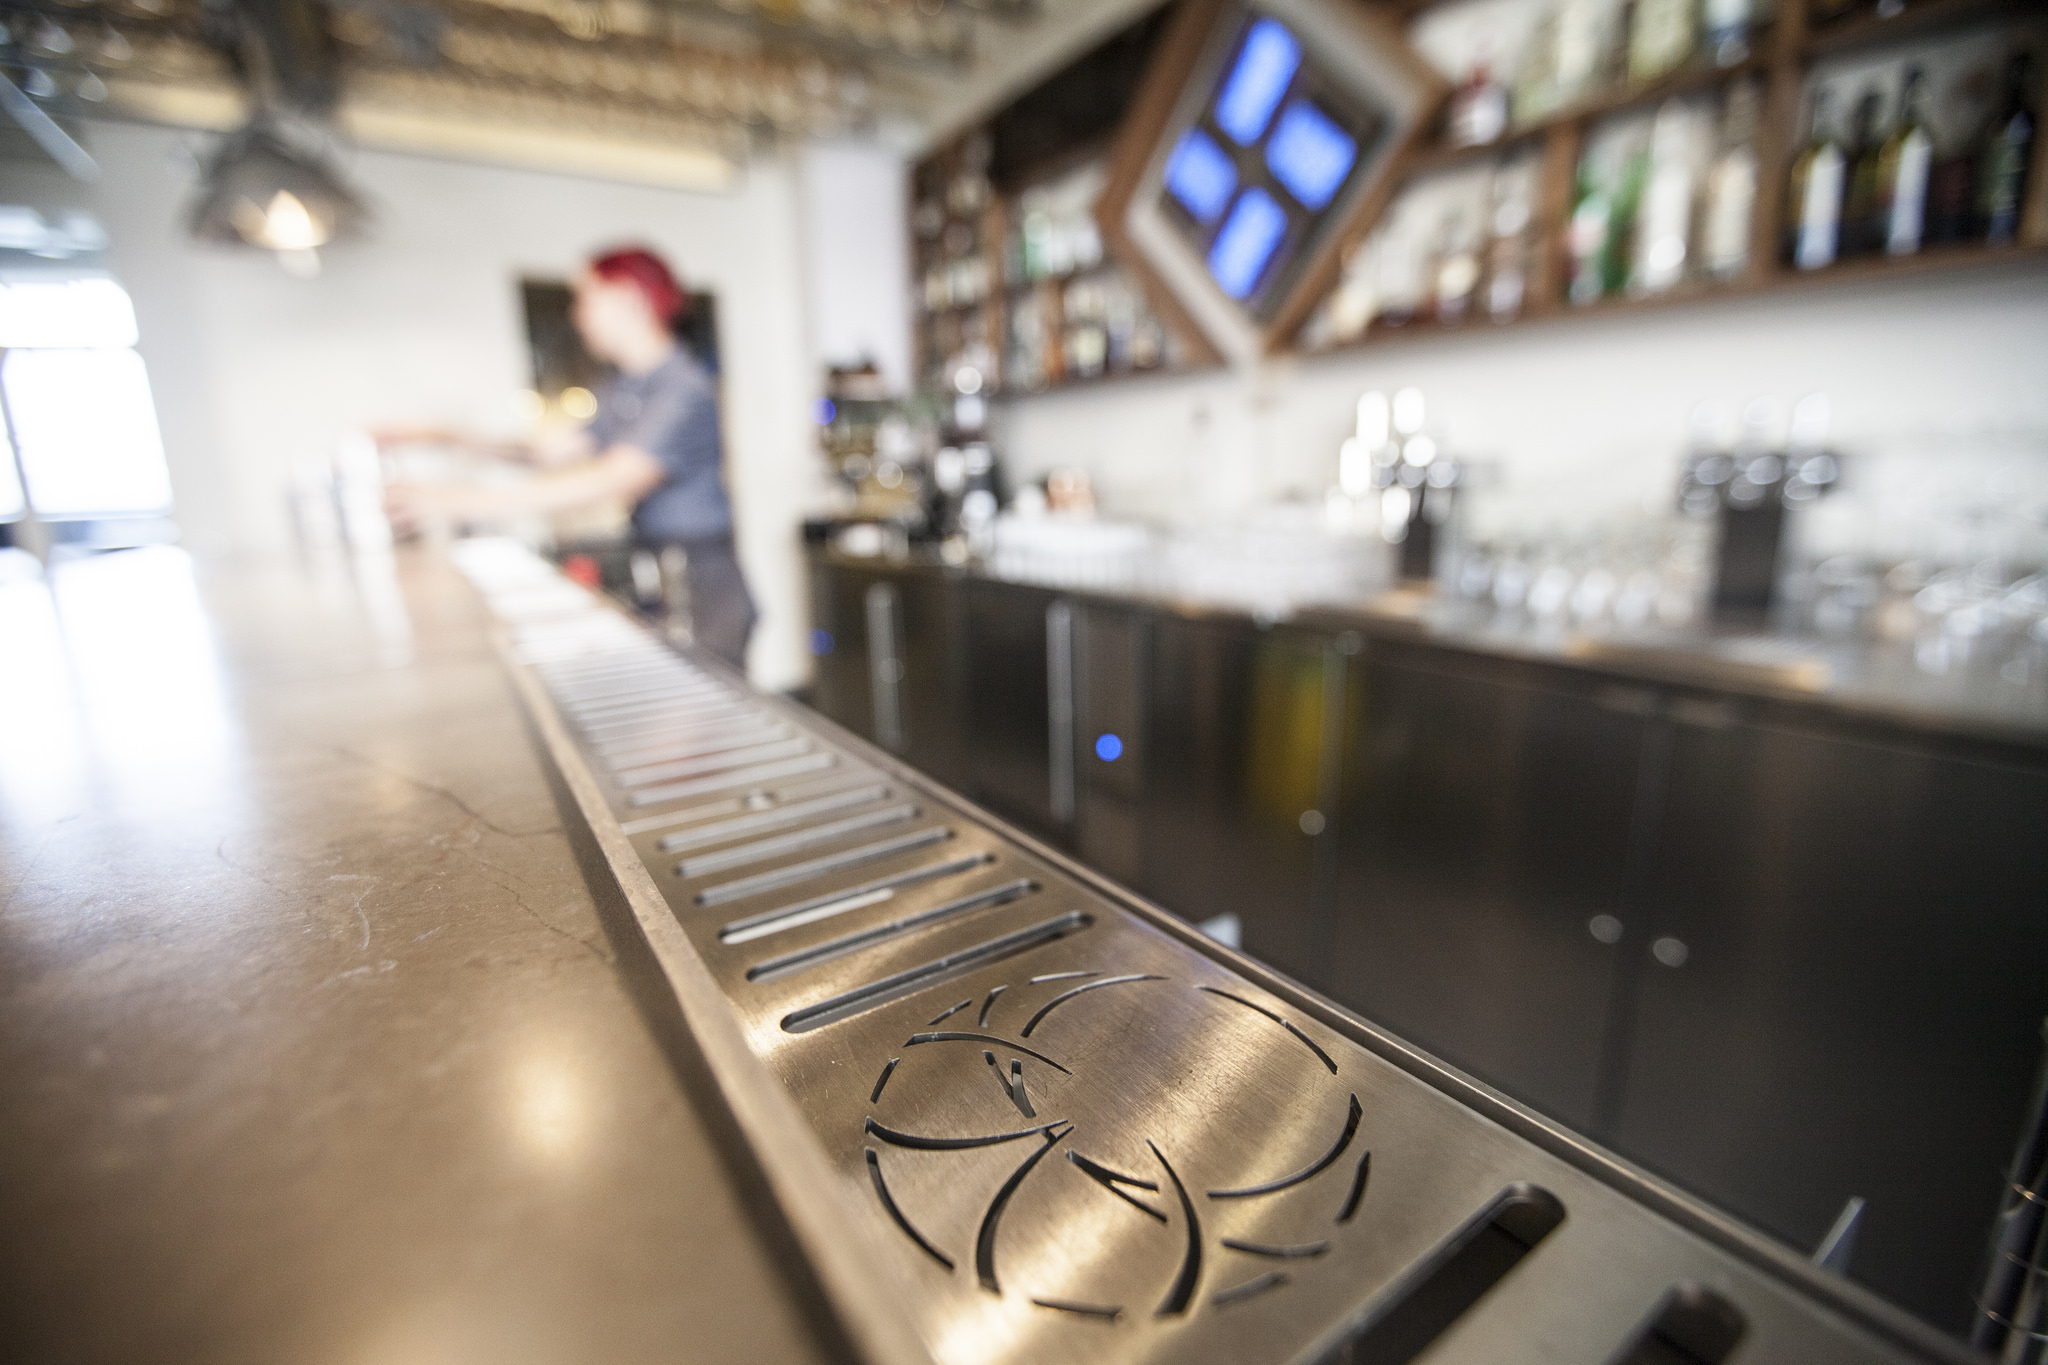  In the bar drip tray, we designed a custom Longnow logo among the drainage. 